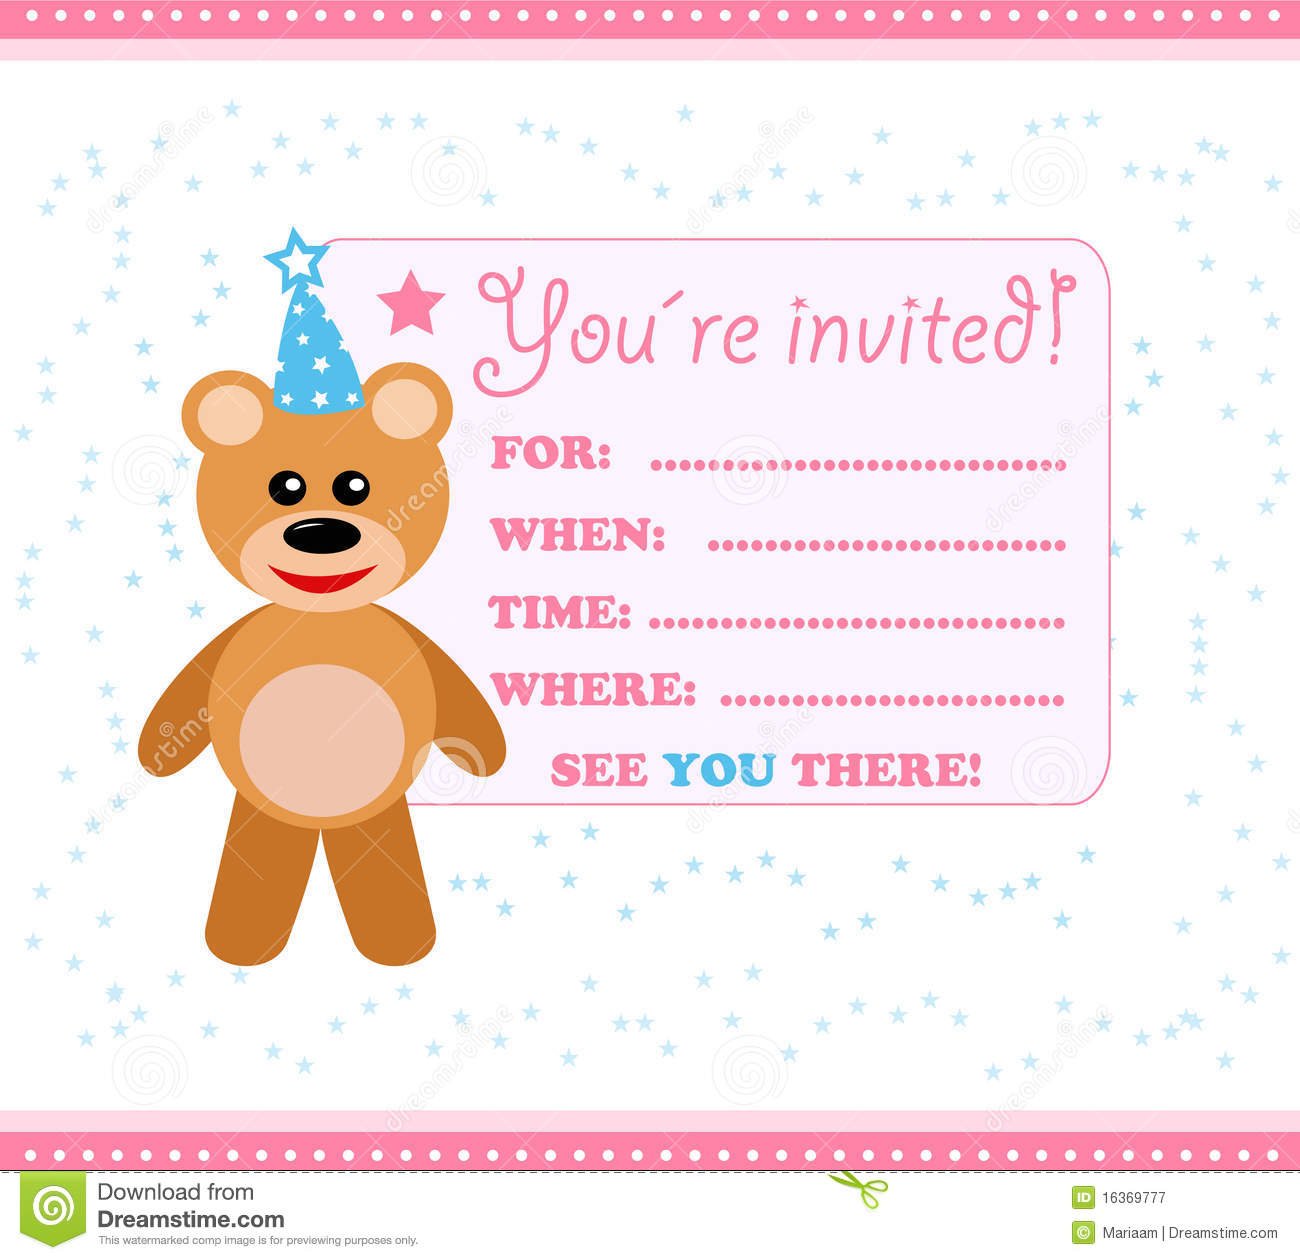 Party Invitation Cards Amazing Party Invitation Cards 60 On Card